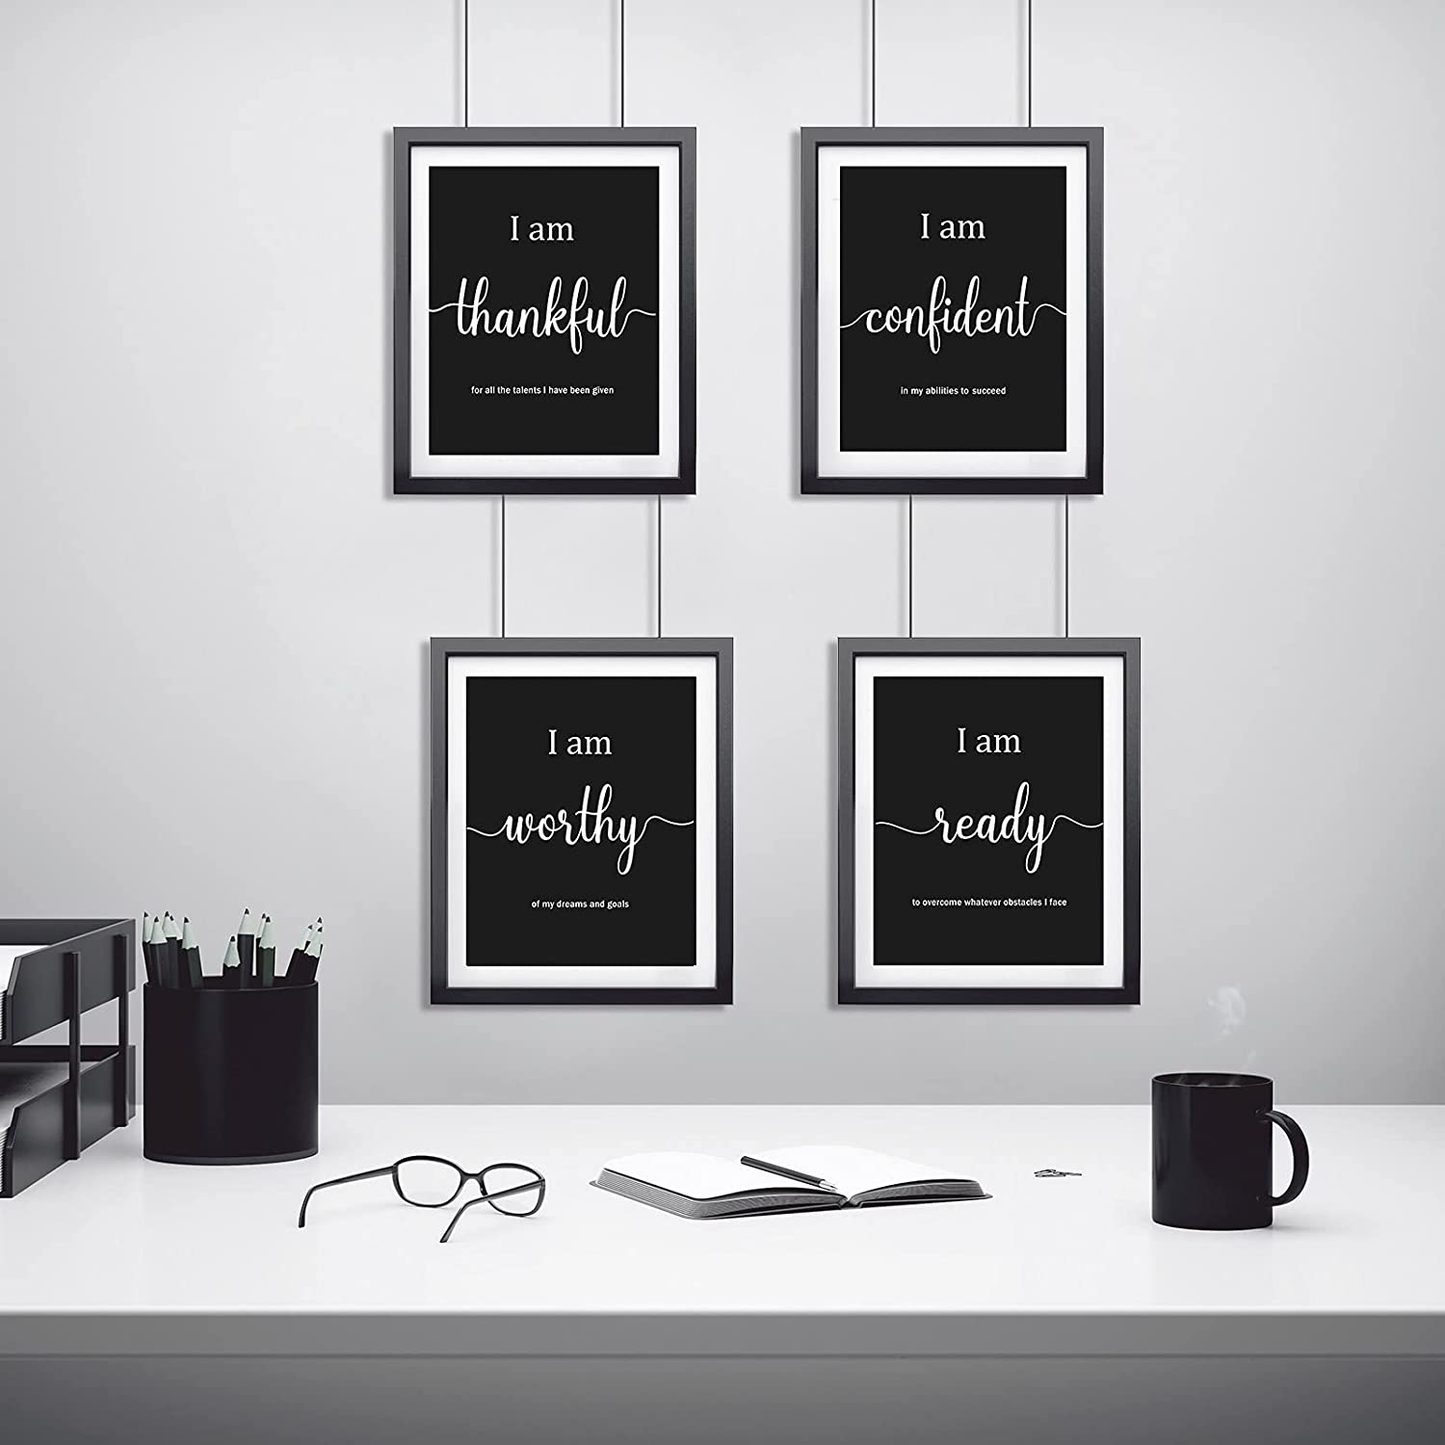 9 Pieces Inspirational Motivational Wall Art Office Bedroom Wall Art, Daily Positive Affirmations for Men Women Kids Inspirational Posters Inspirational Positive Quotes Sayings Wall Decor (White)